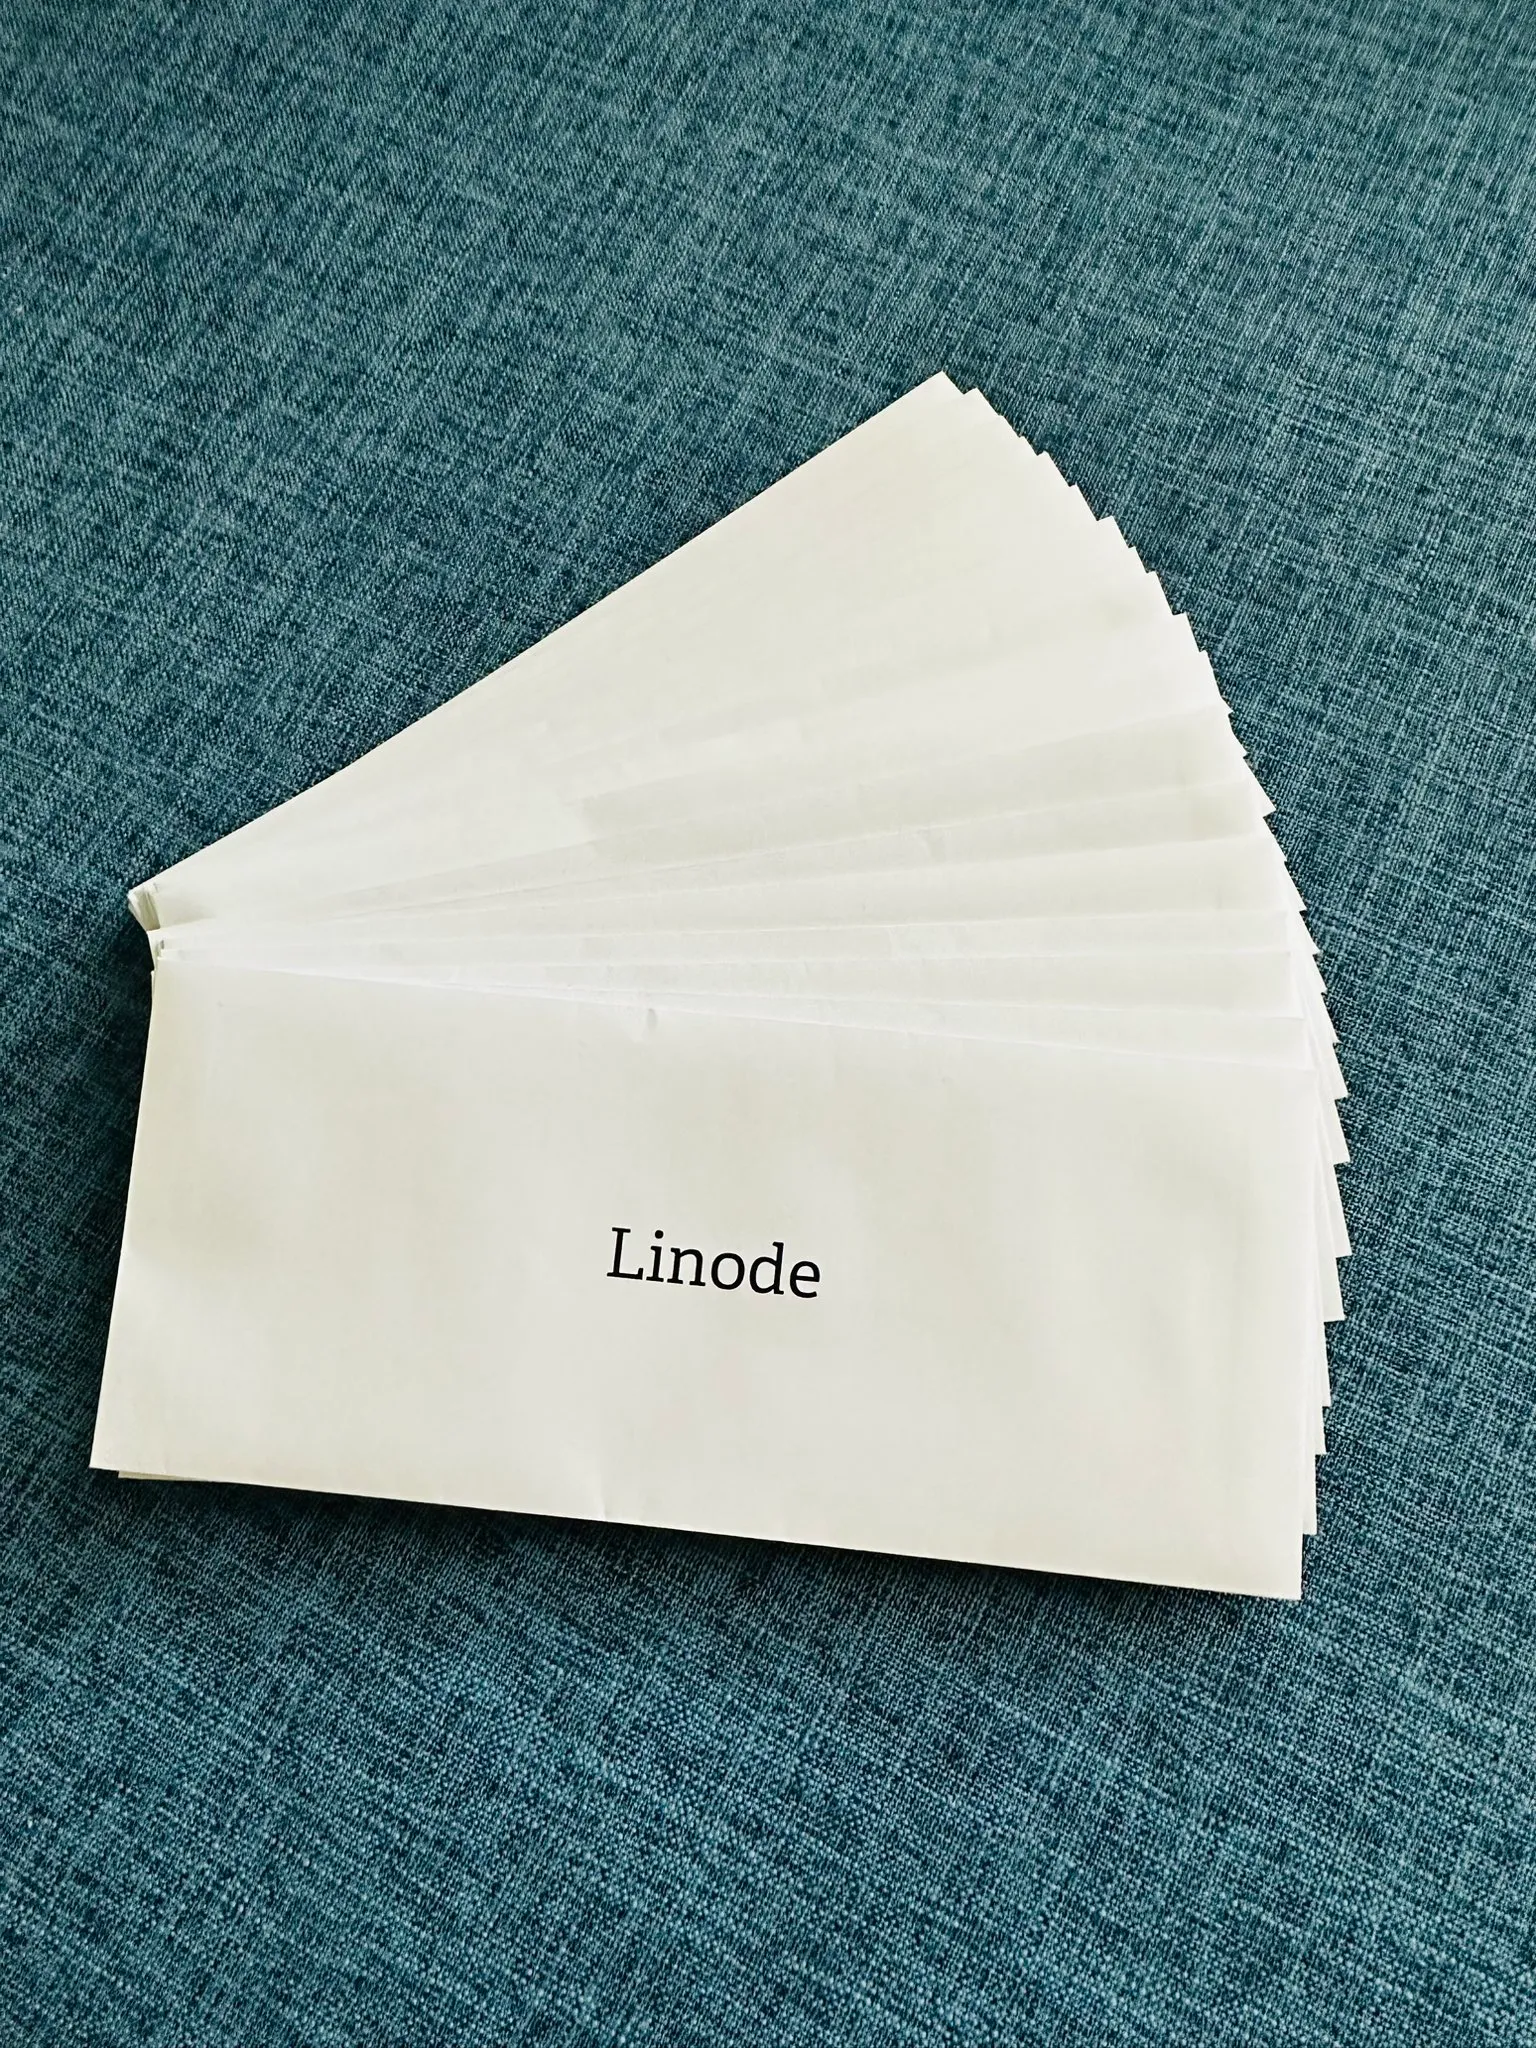 A stack of envelopes with two-factor authentication codes